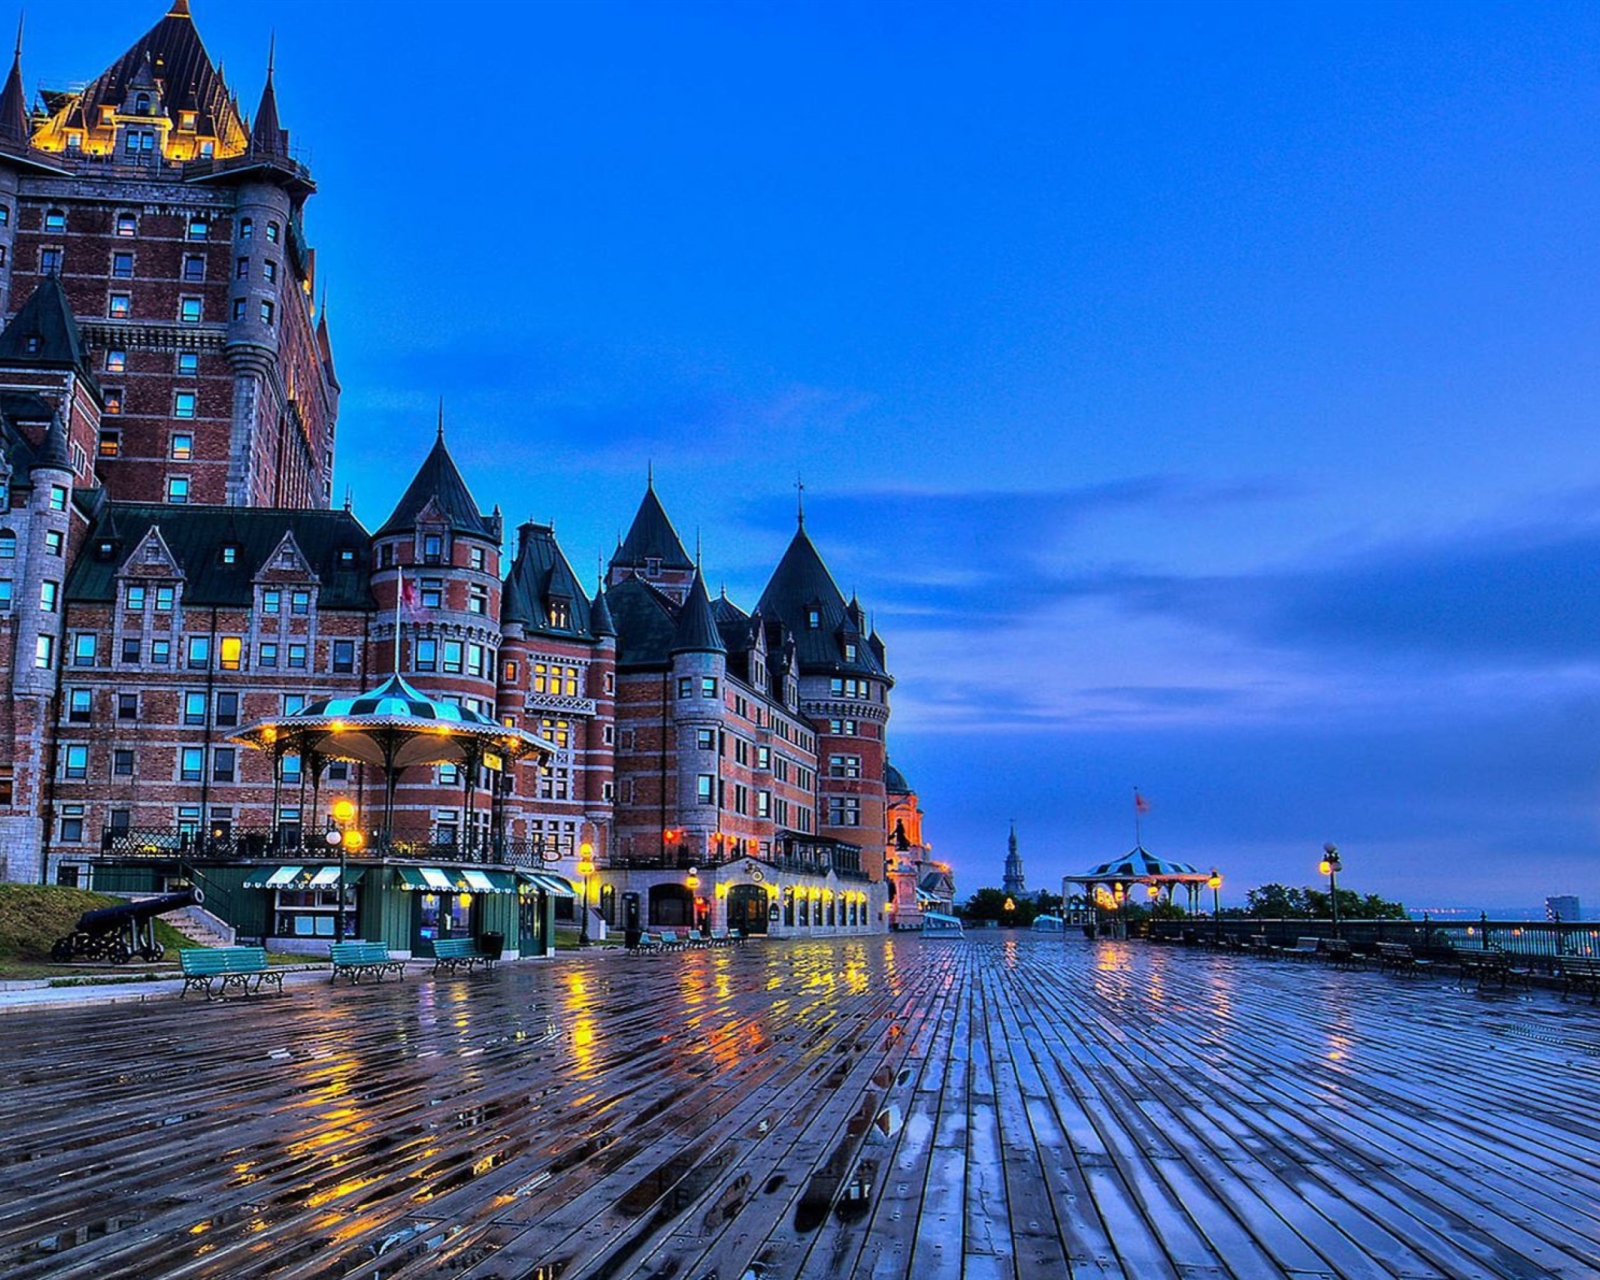 Château Frontenac - Grand Hotel in Quebec wallpaper 1600x1280